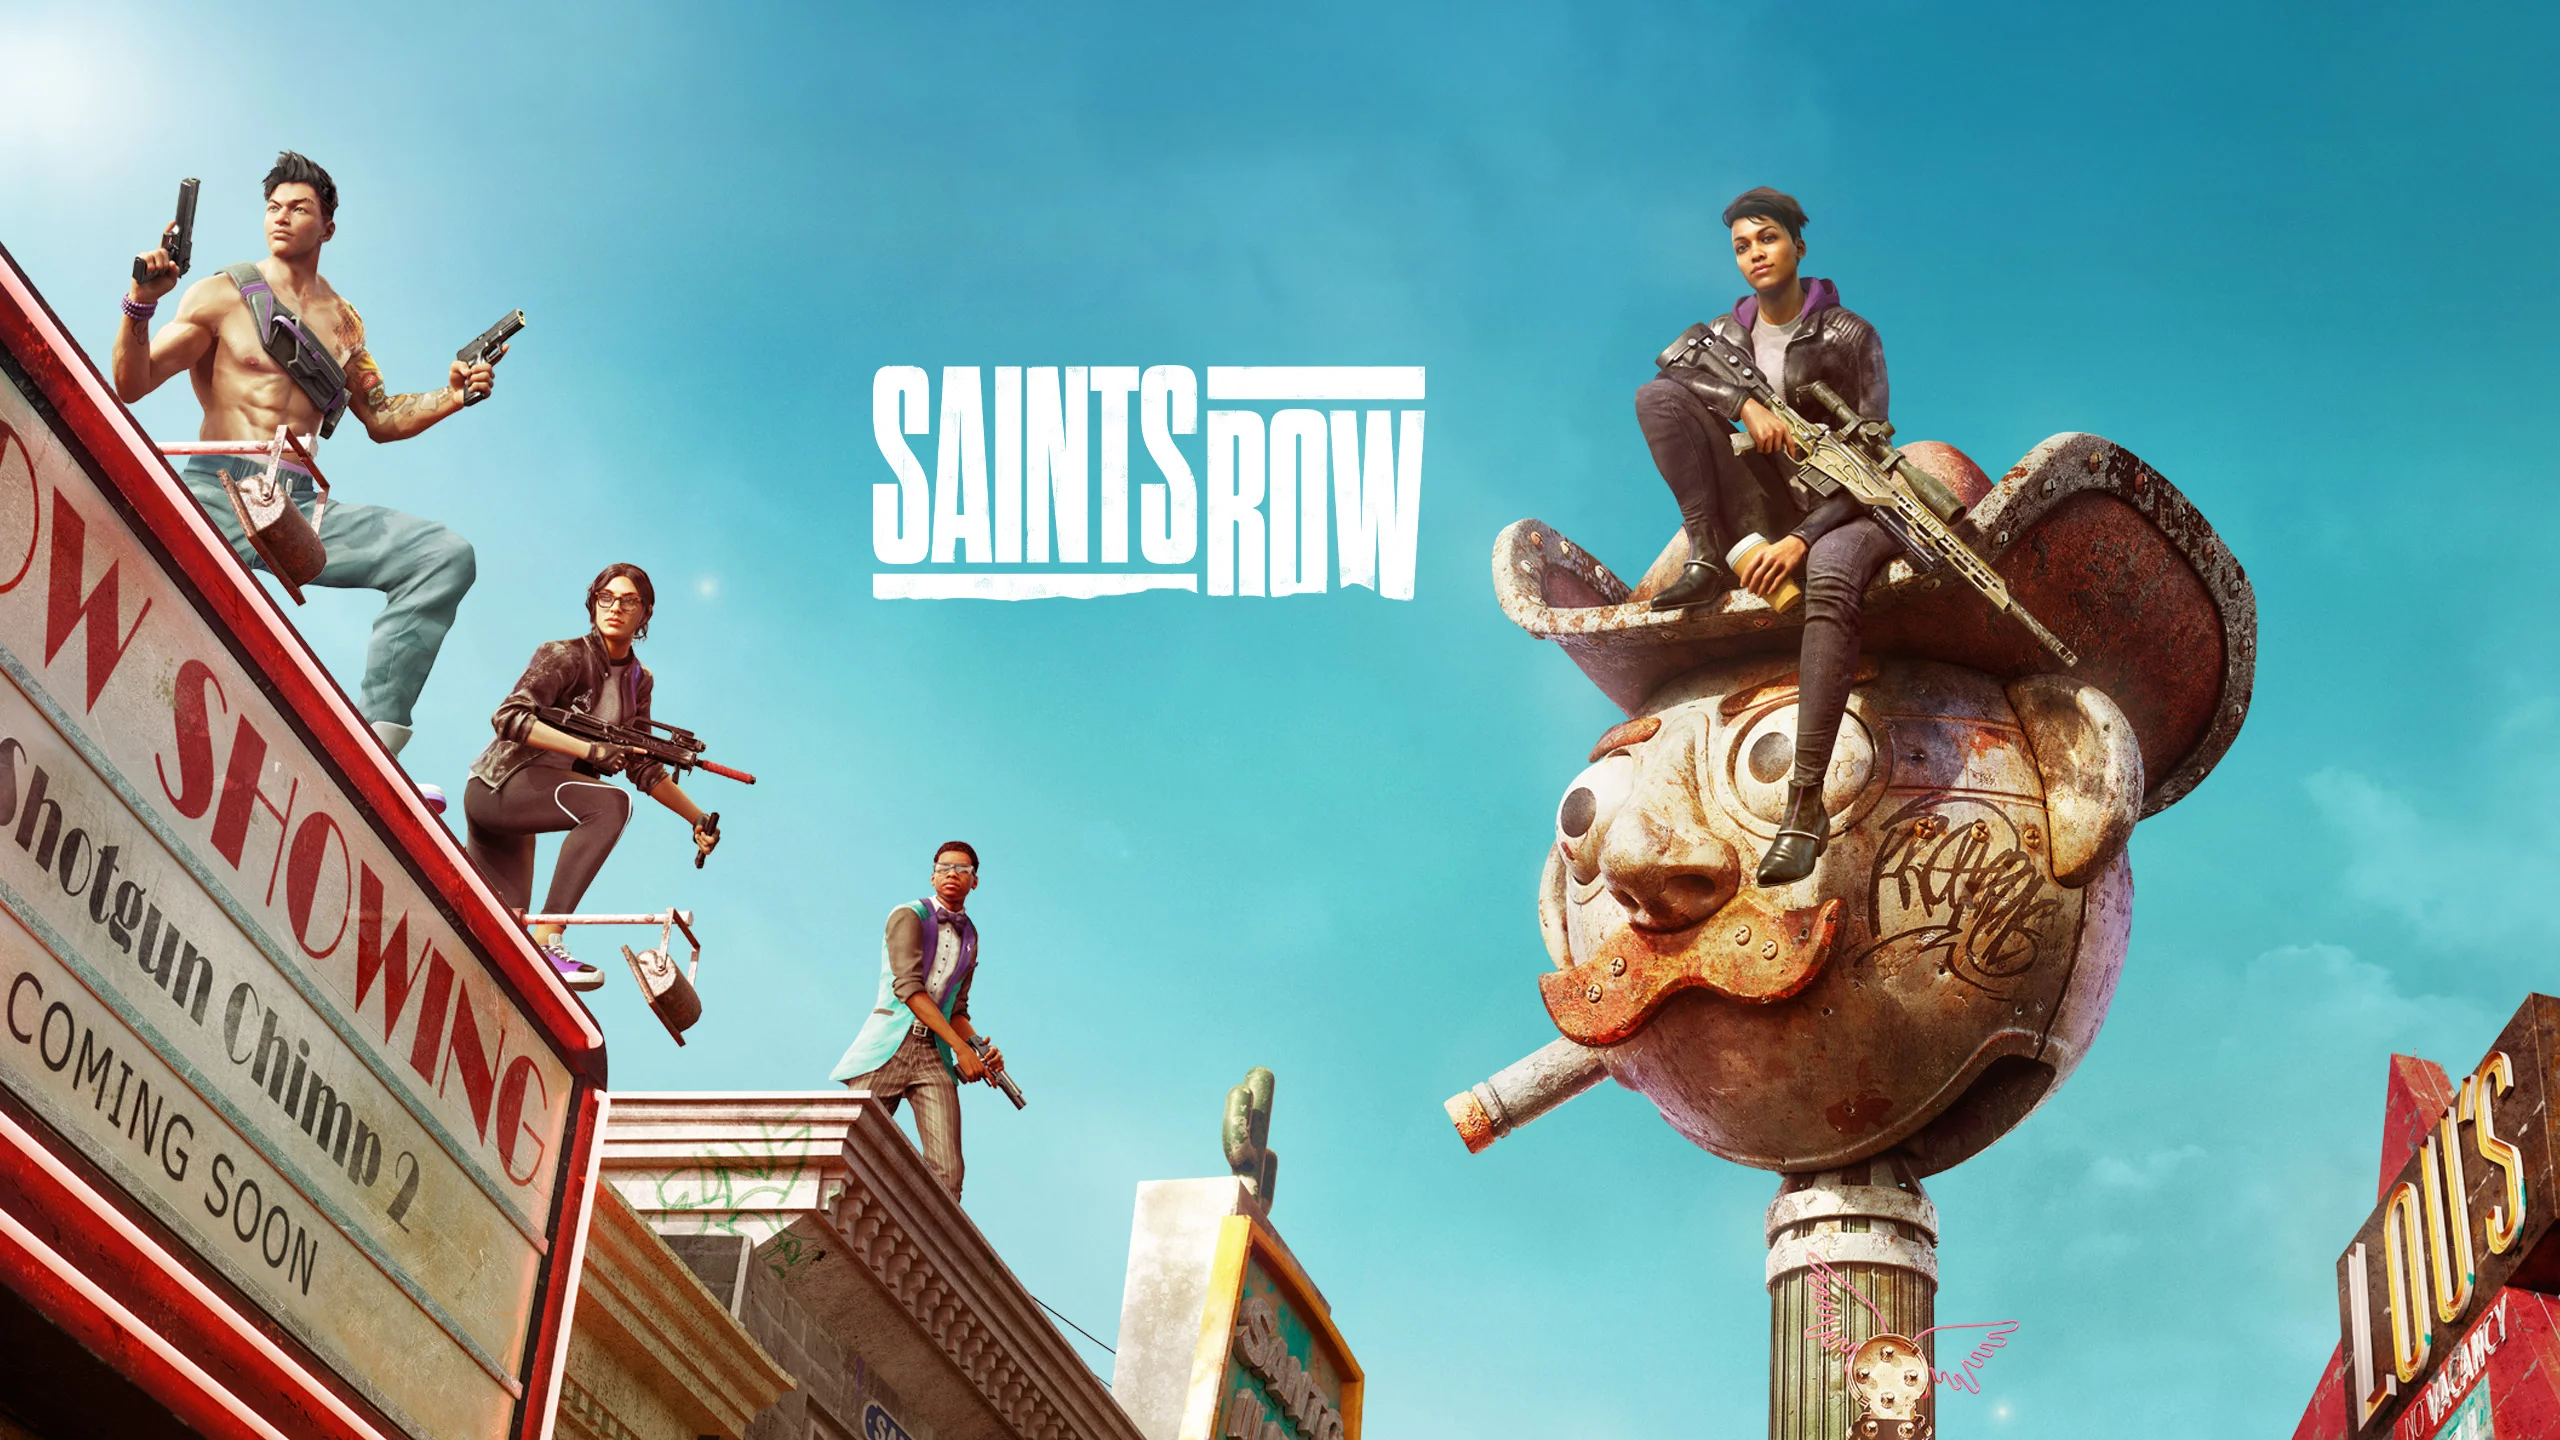 Where can I find the Our Saints Row Review